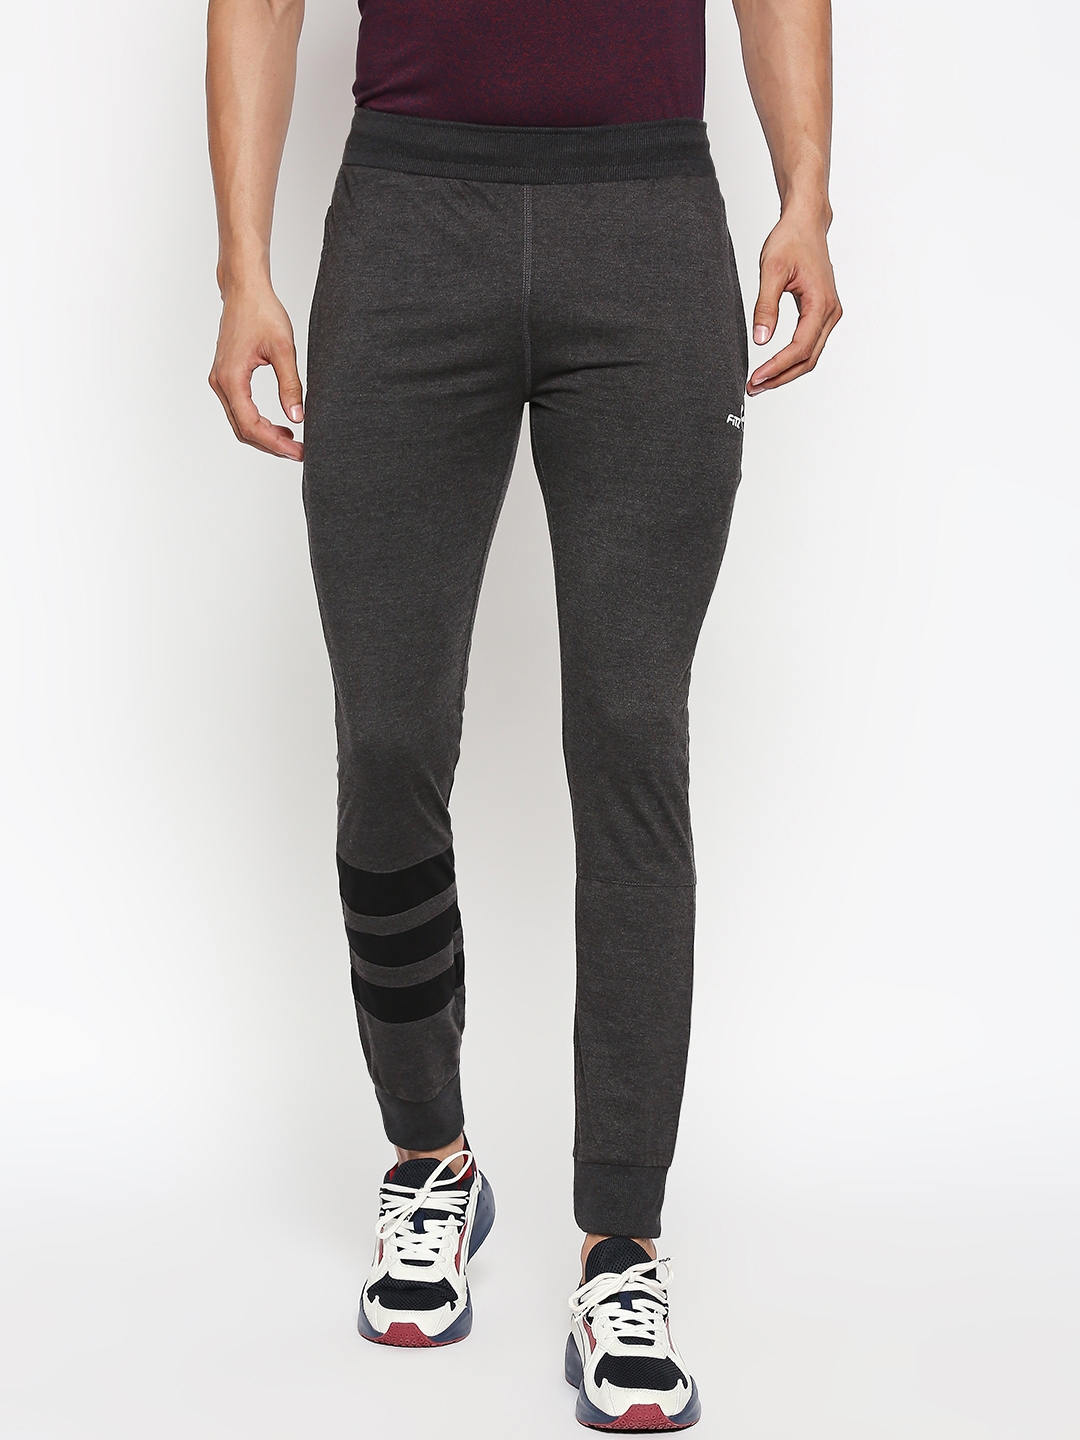 FITZ | Grey Striped Casual Jogger